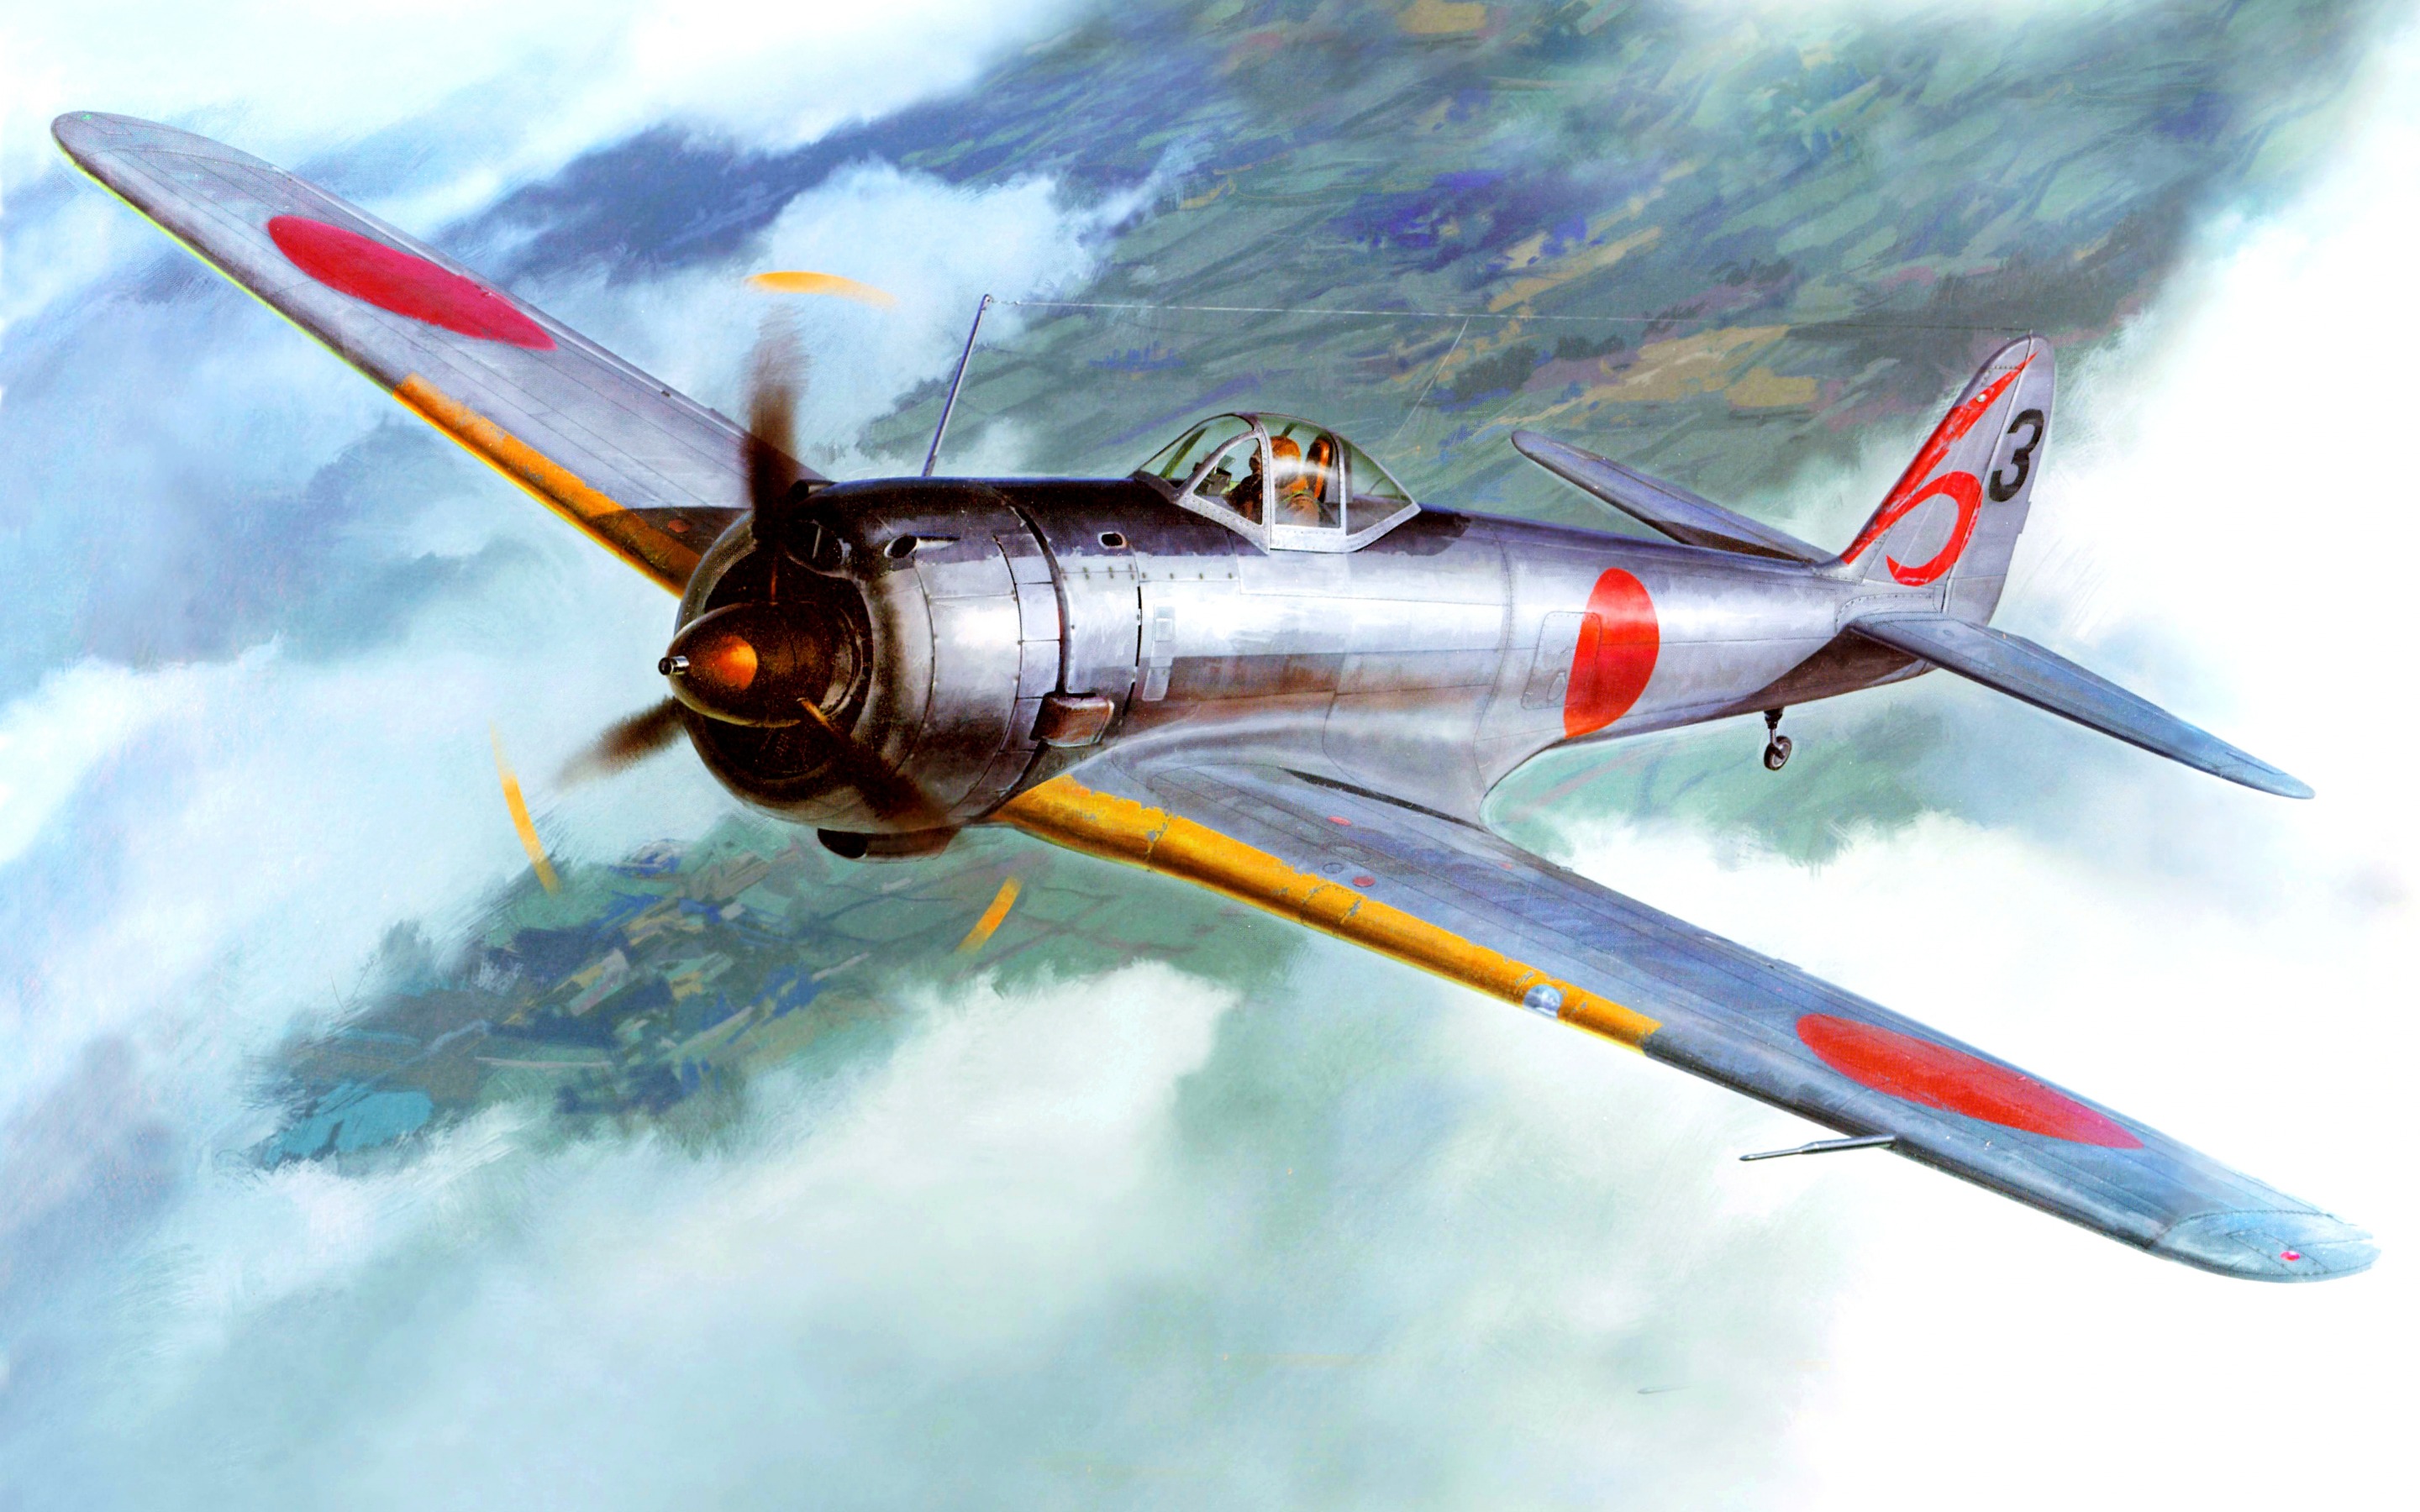 Download Wallpaper Nakajima Ki 43 Hayabusa, Japanese Fighter Aircraft, WW Imperial Japan, World War II, Art For Desktop With Resolution 2880x1800. High Quality HD Picture Wallpaper